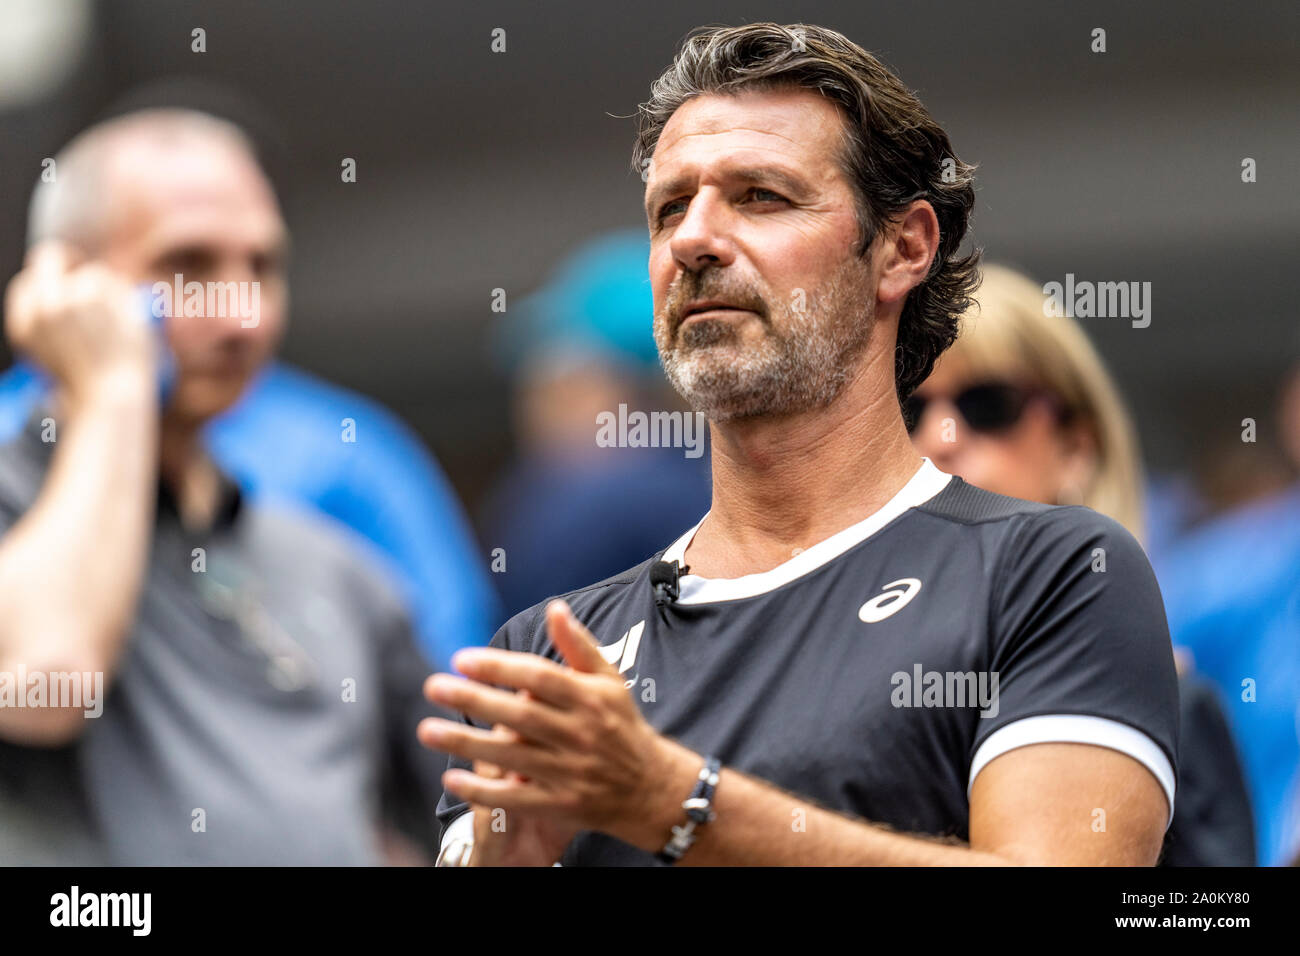 Serena Williams of USA's  coach Patrick Mouratoglou cheering her while she is competing in the finals of the Women's Singles at the 2019 US Open Tenni Stock Photo